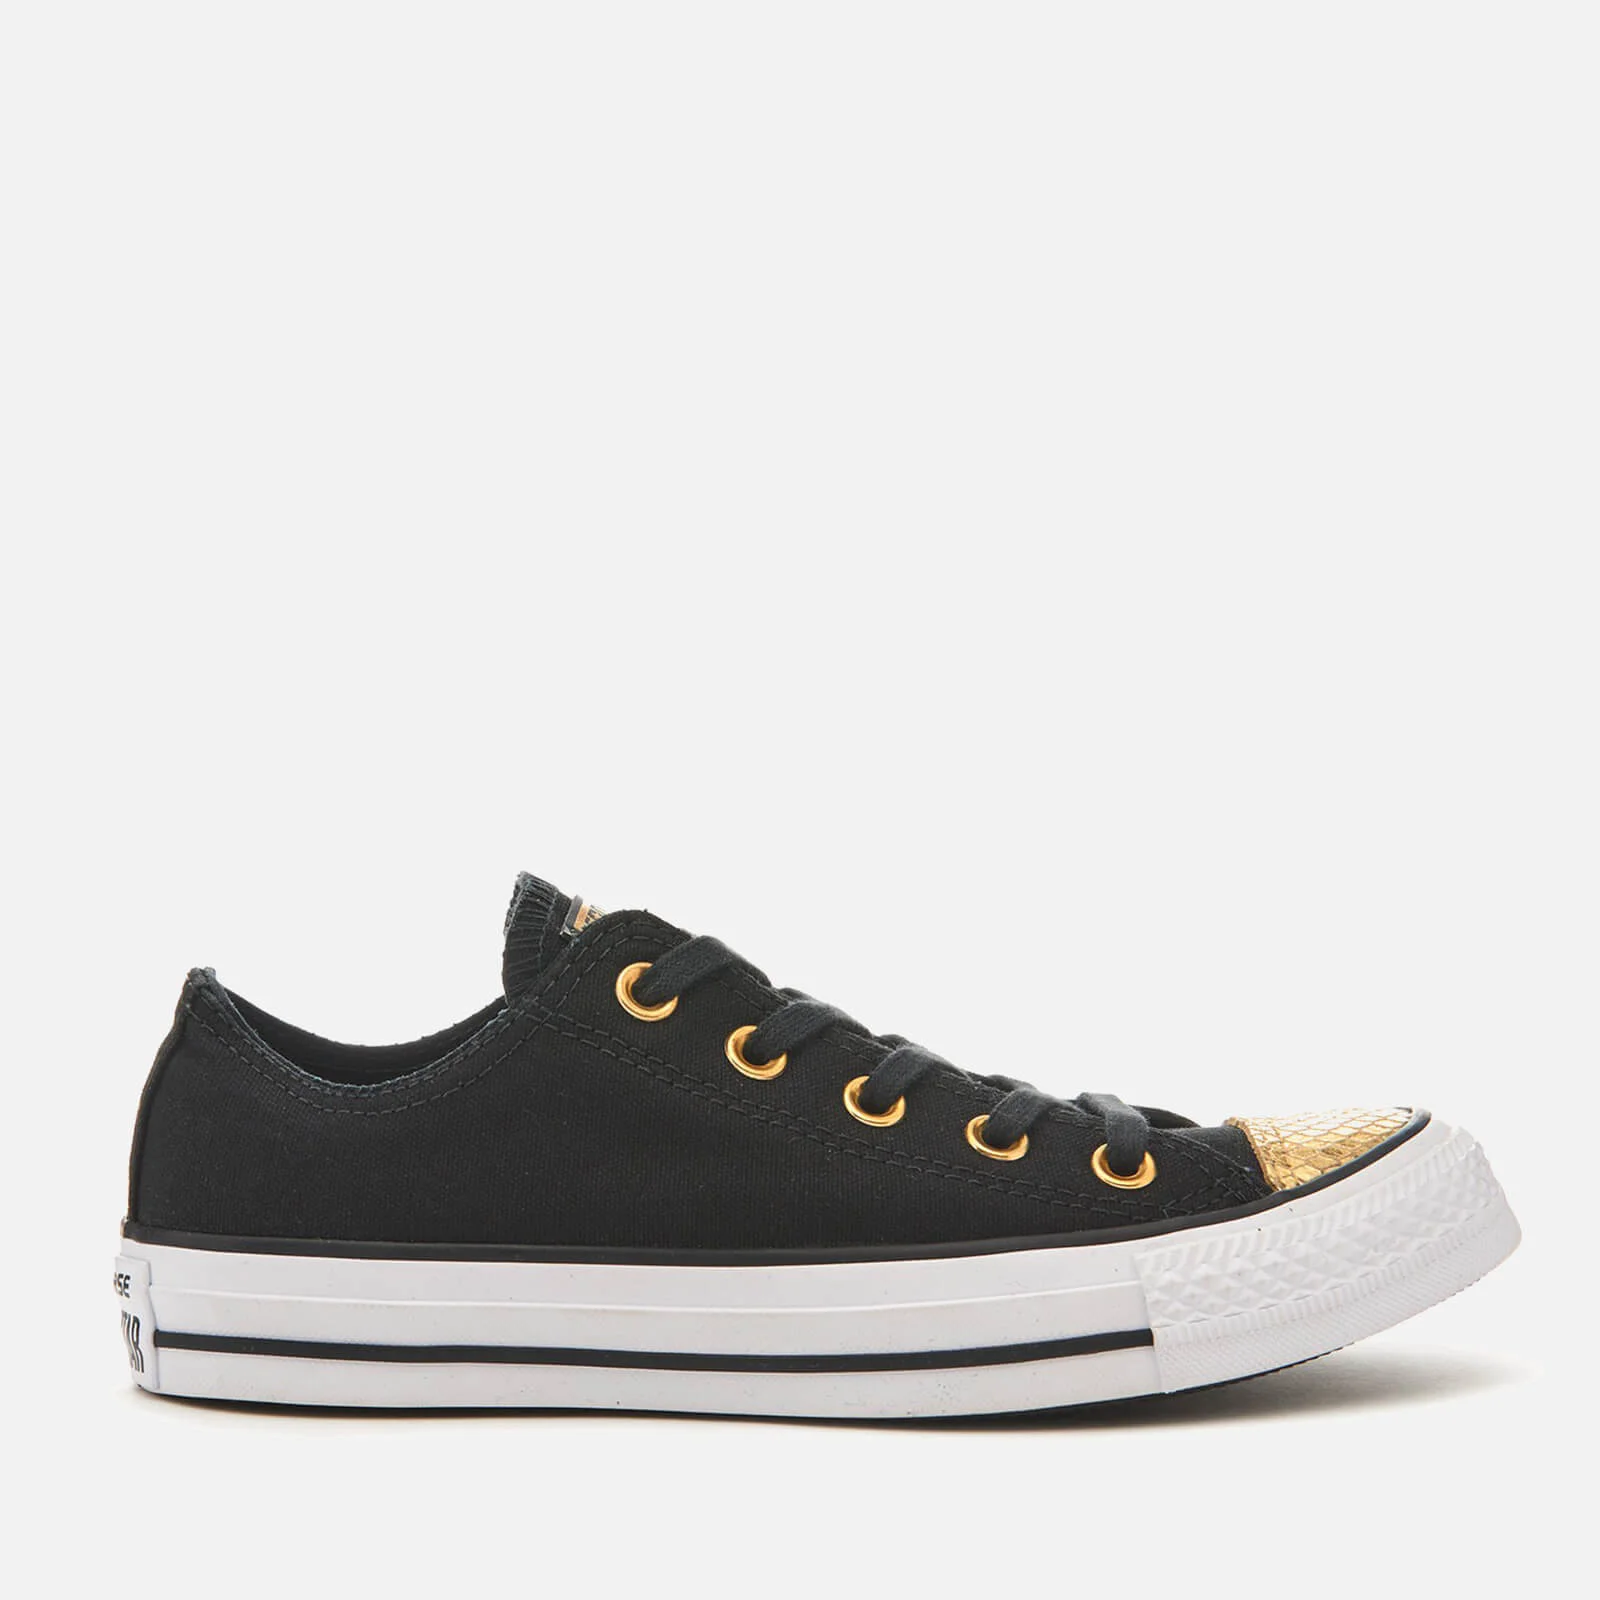 Converse Women's Chuck Taylor All Star Ox Trainers - Black/Gold/White Image 1